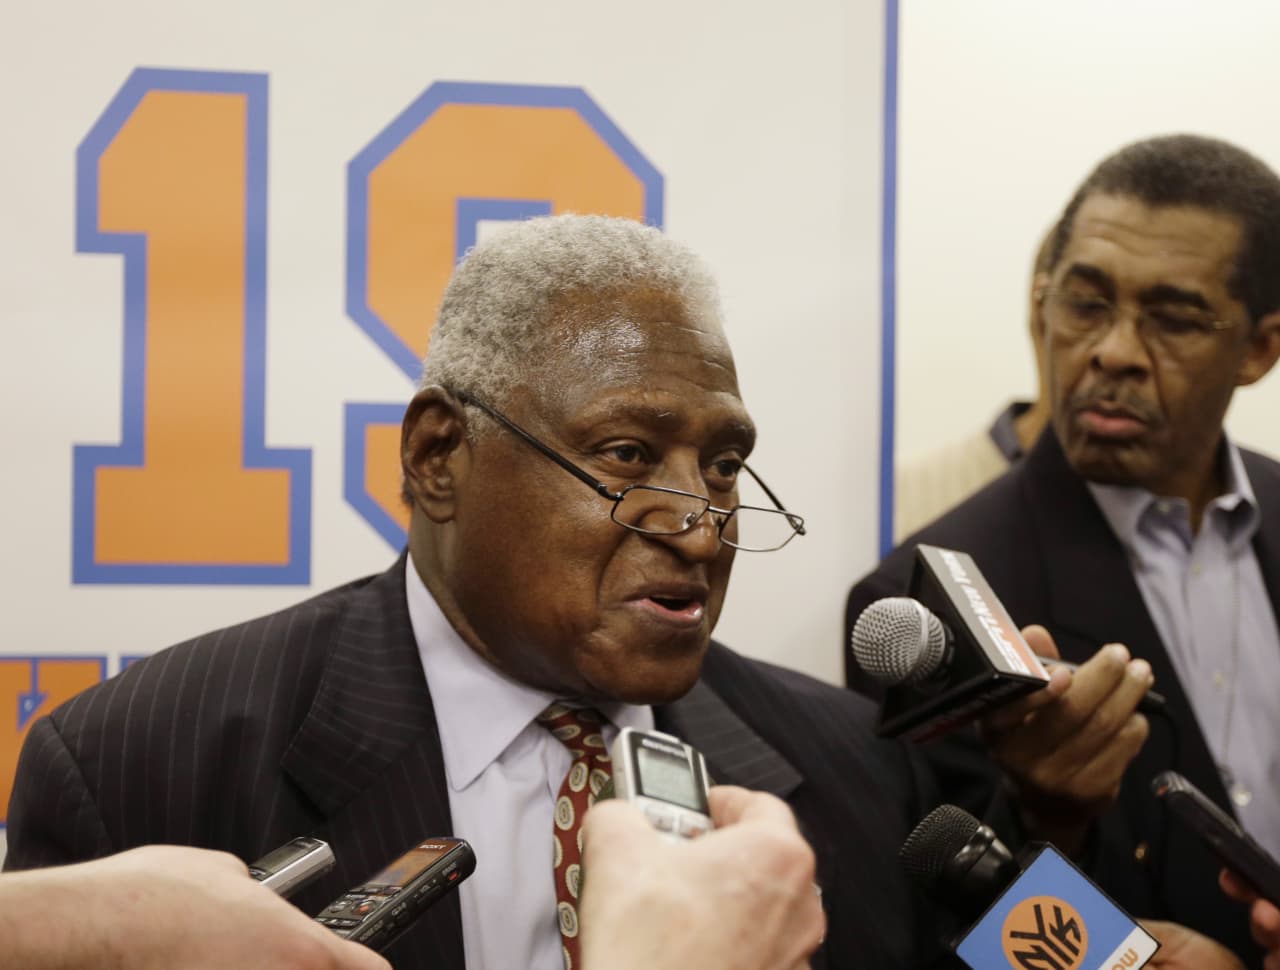 Remembering New York Knicks legend Willis Reed – New York Daily News